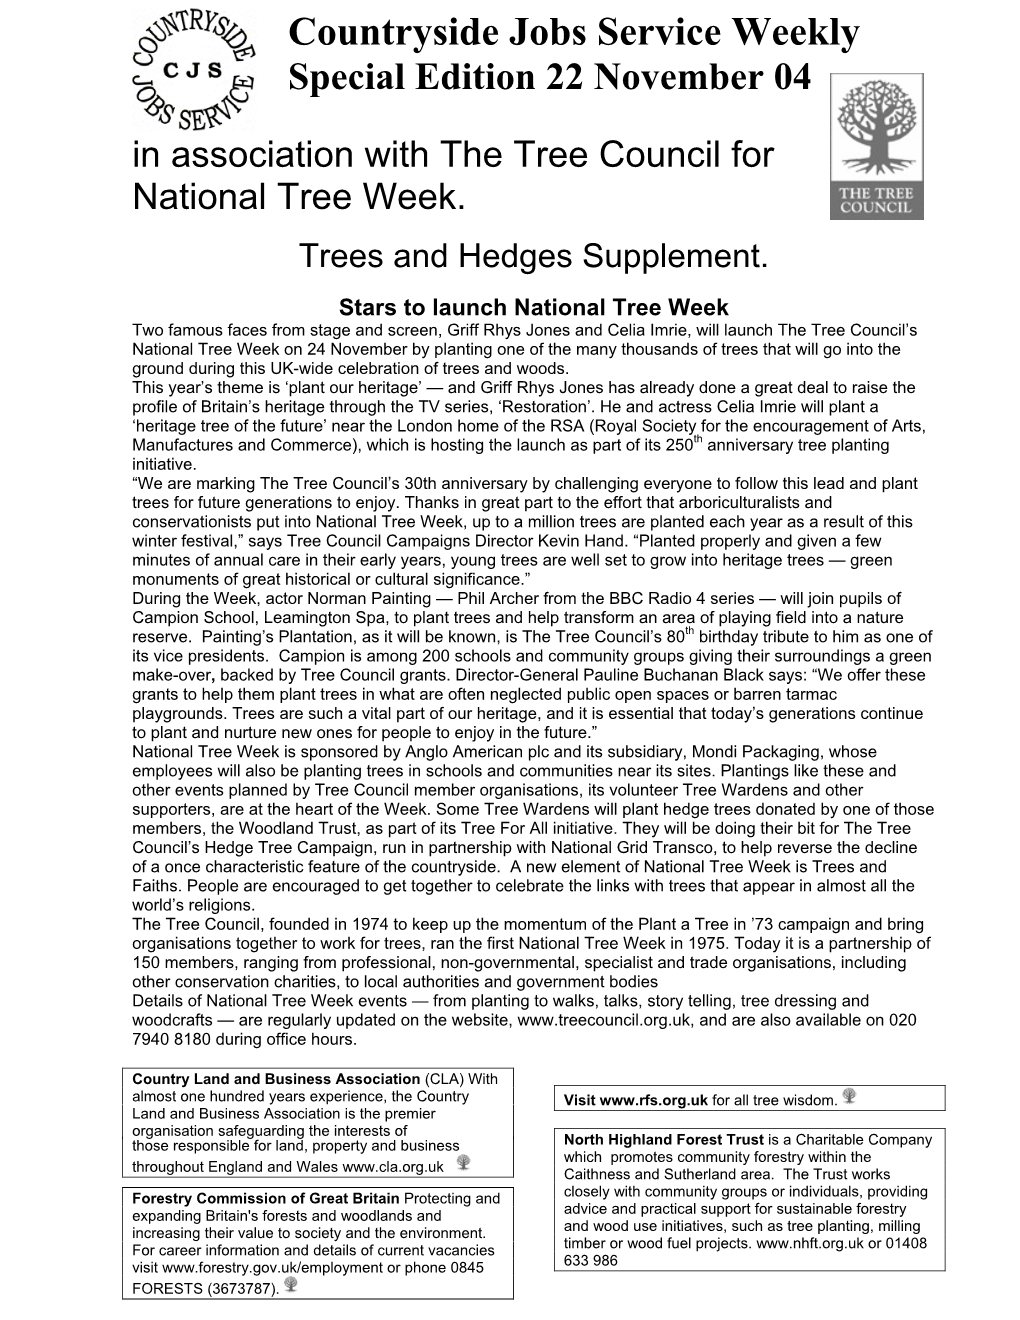 Countryside Jobs Service Weekly Special Edition 22 November 04 in Association with the Tree Council for National Tree Week